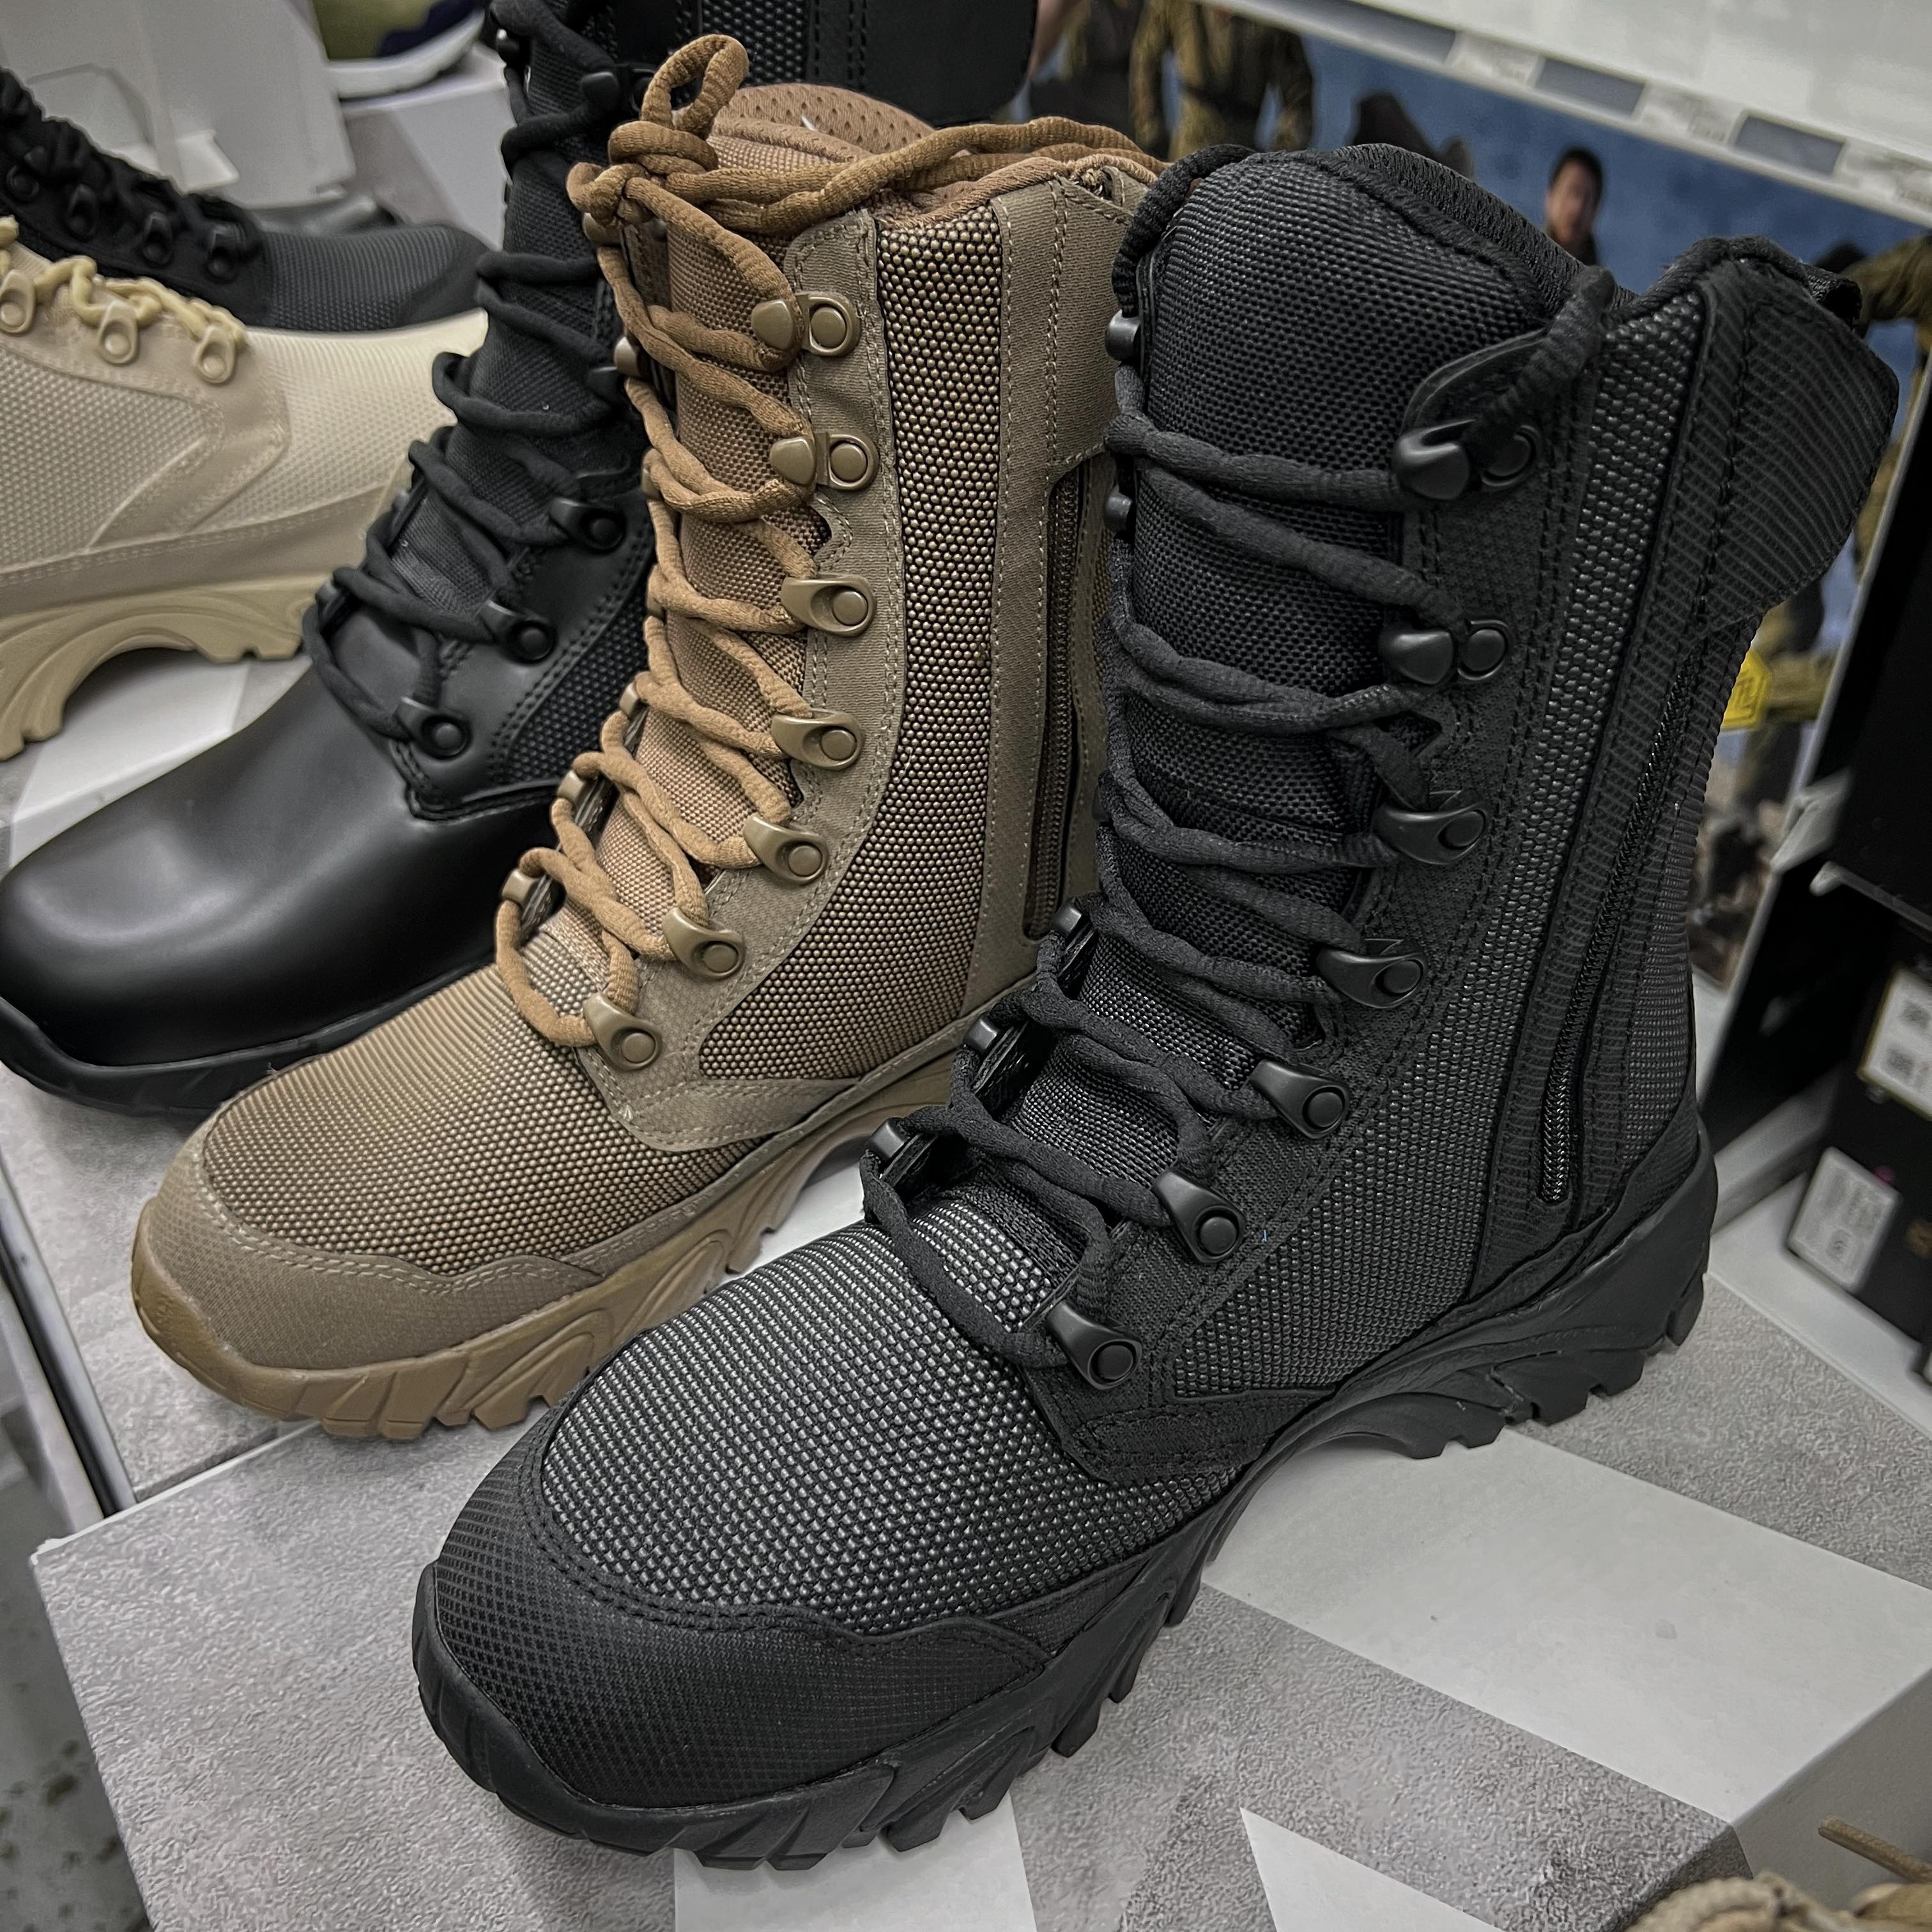 Altai - MF Super Fabric Tactical Boots 8" Side Zip